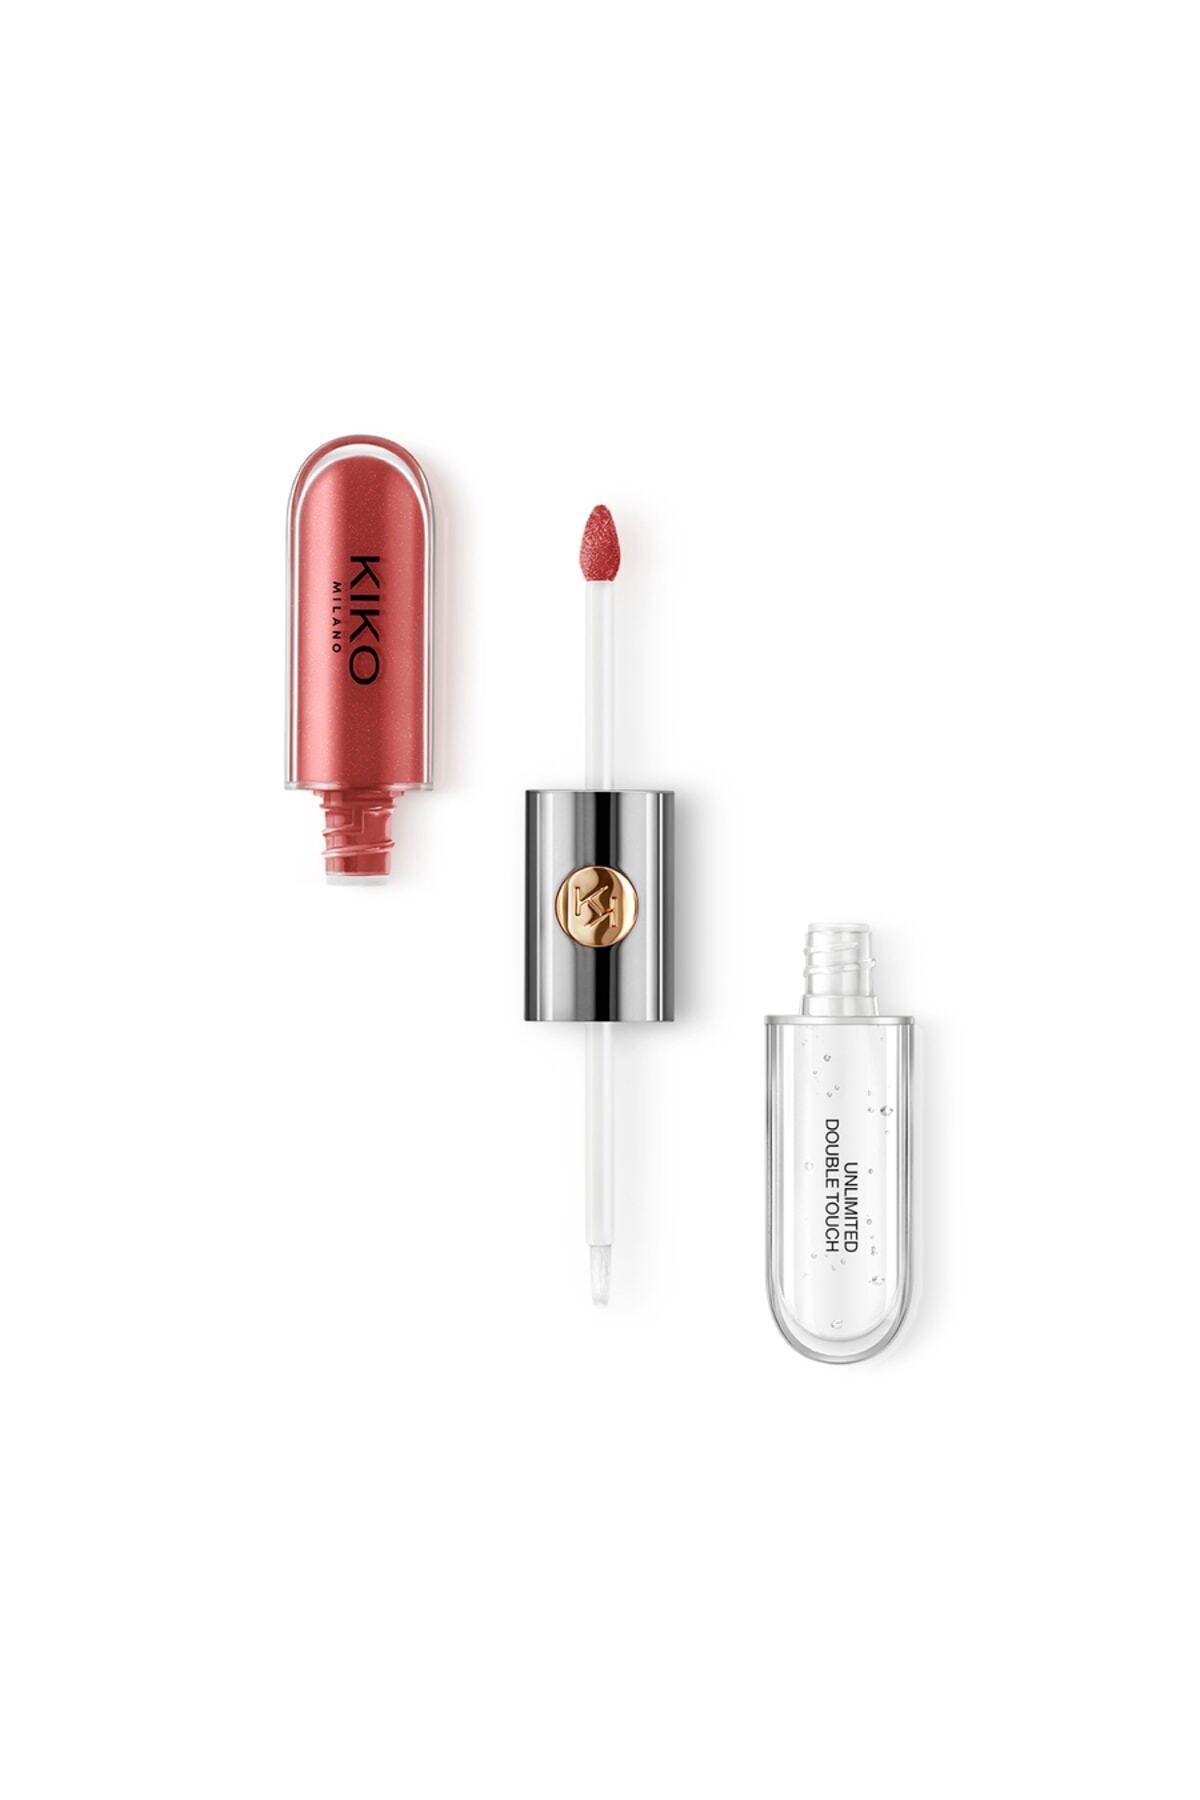 KIKO LİQUİD LİPSTİCK - UNLİMİTED DOUBLE TOUCH 108 SATİN CURRANT RED 6 ML DMBA89